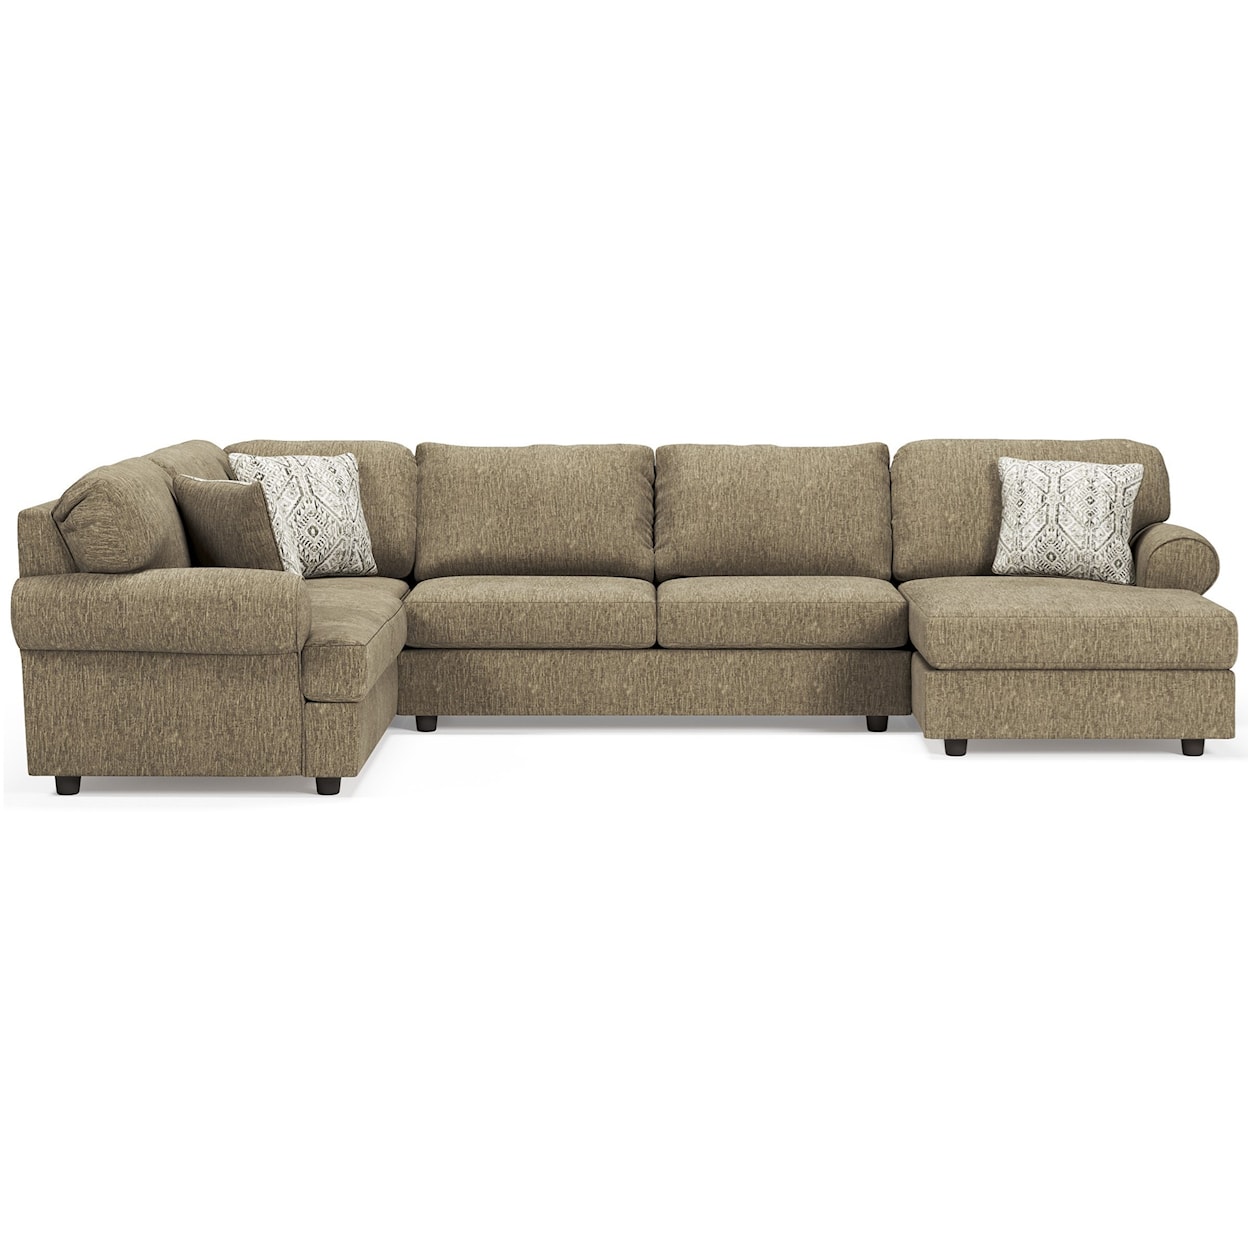 Signature Design by Ashley Hoylake 3-Piece Sectional with Chaise